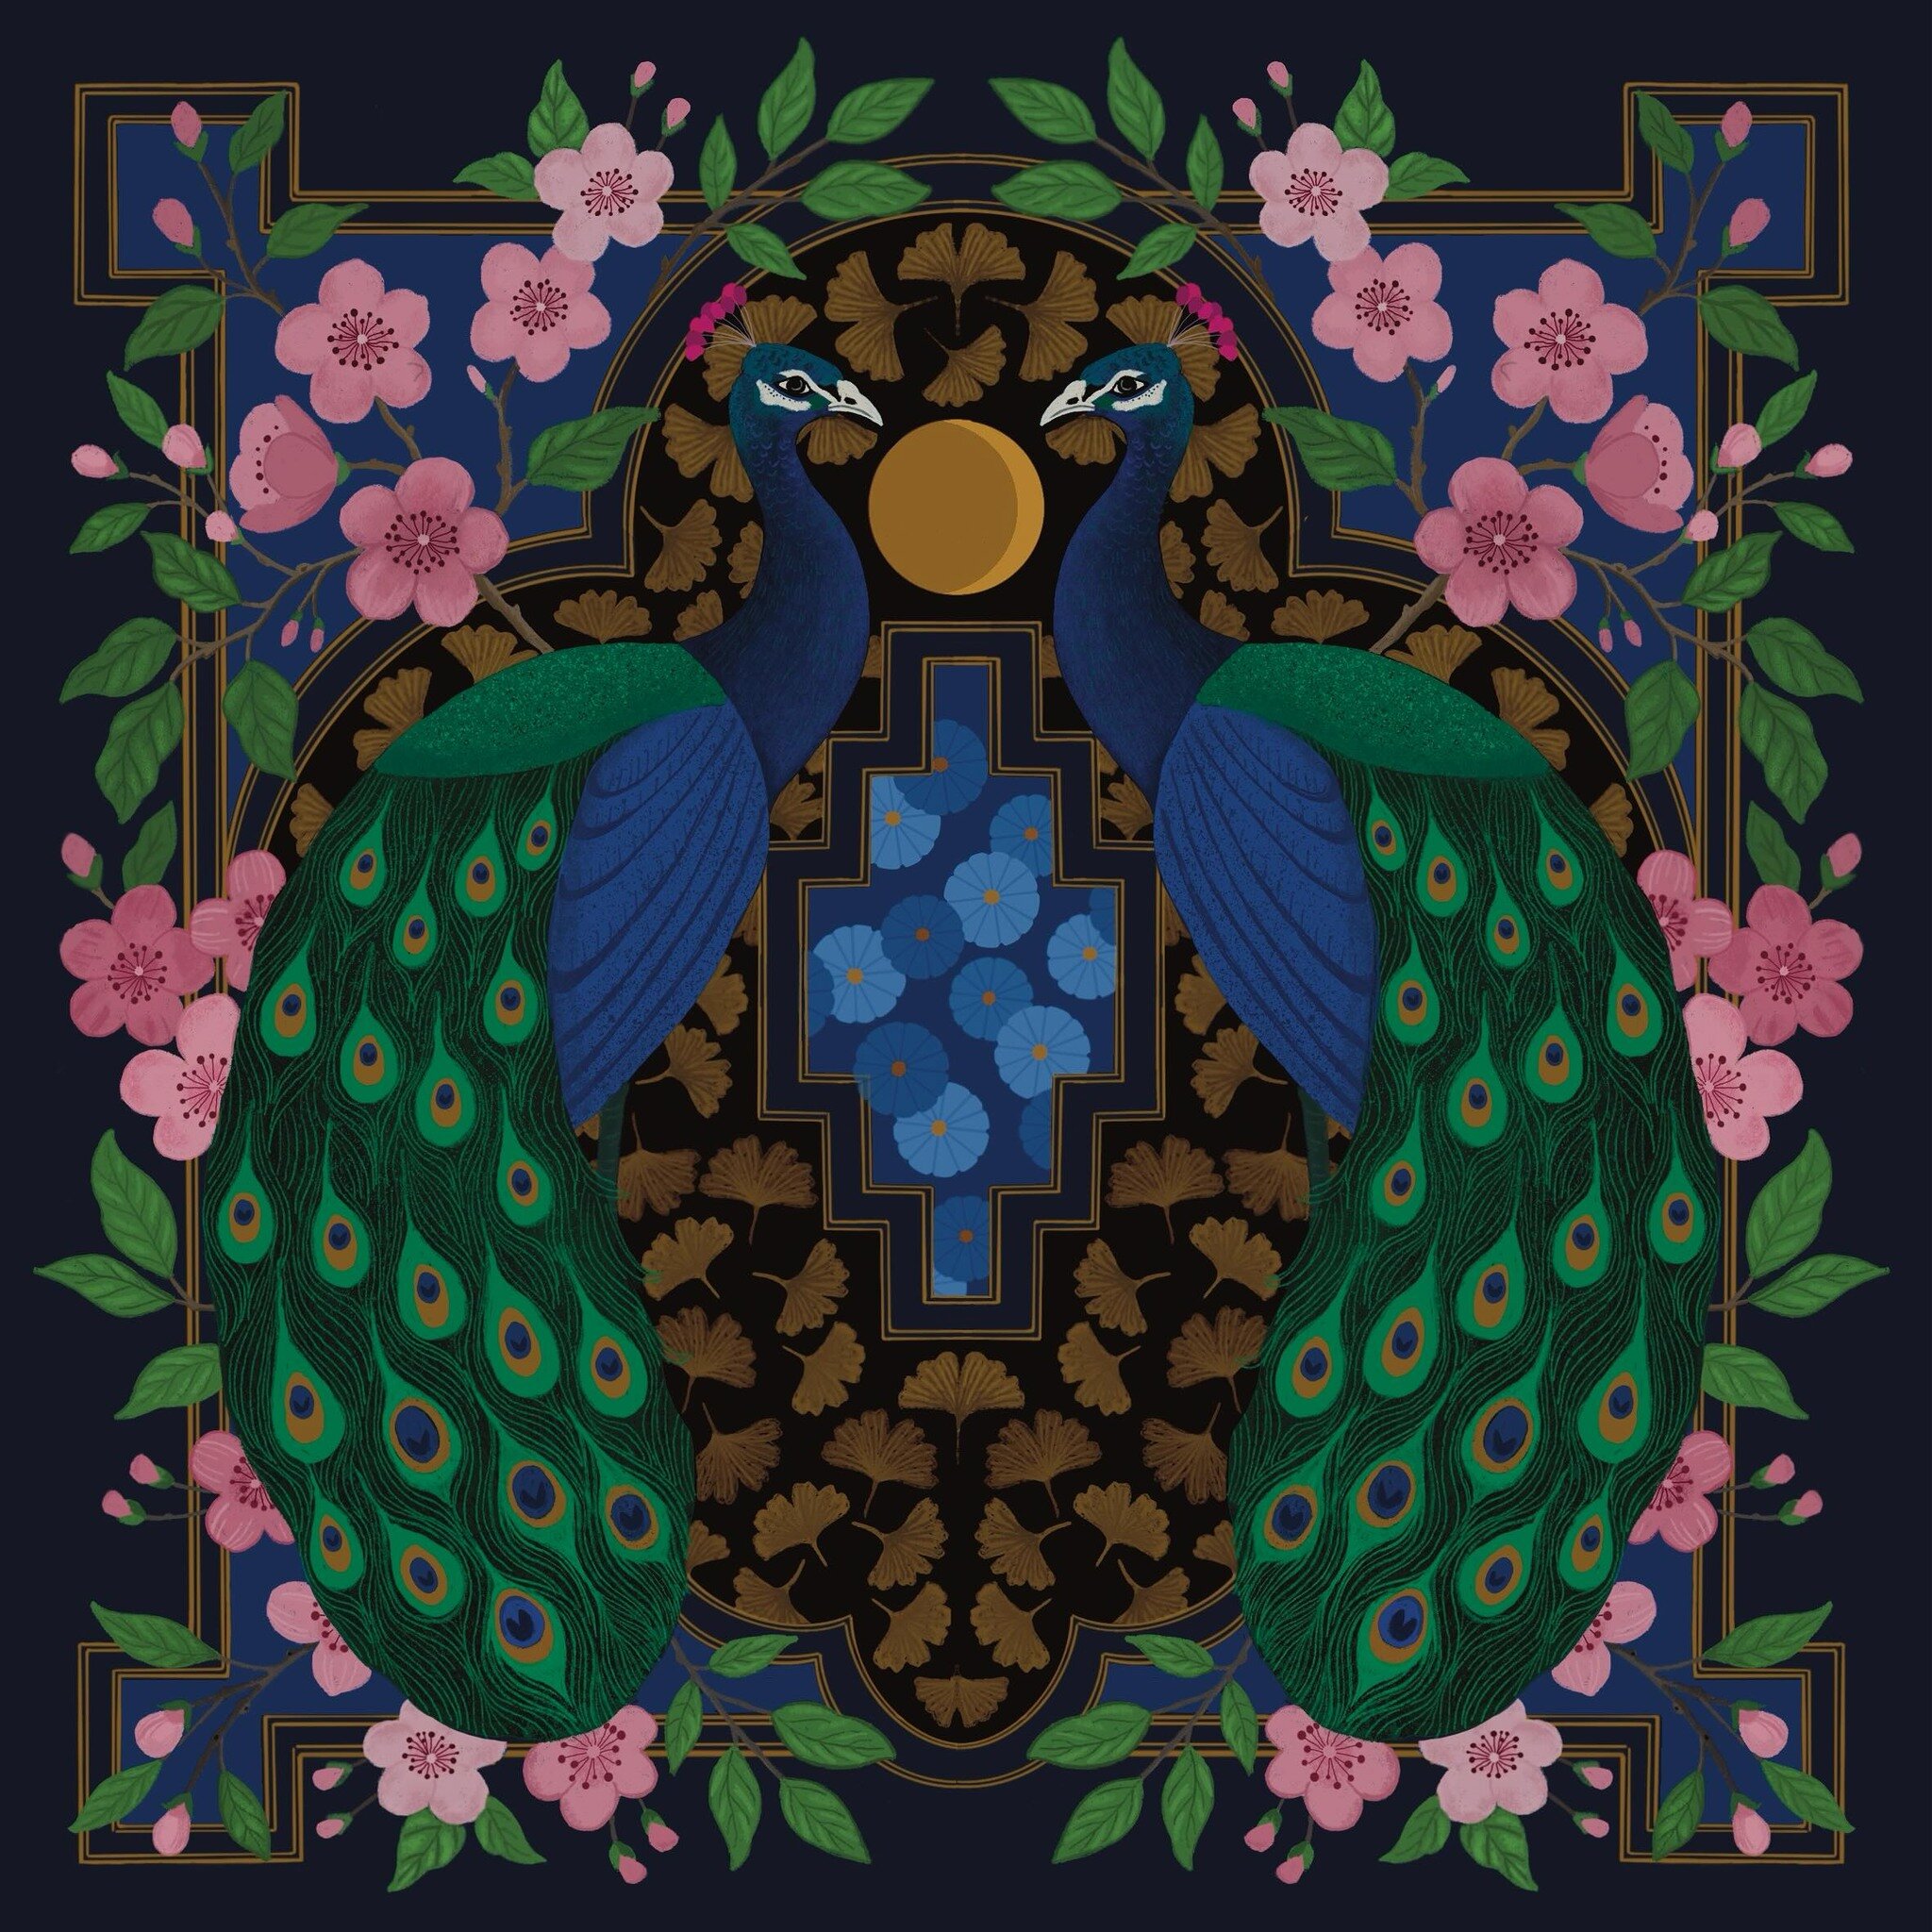 ⛩️ Tokyo Story - this weeks art prompt for #jehanesgoldenthread is Kujaku or Peacock. 

Taking inspiration from decorative ceramics, this piece includes a moon, blossom and ginko leaves which were all previous prompts but I didn&rsquo;t get the time 